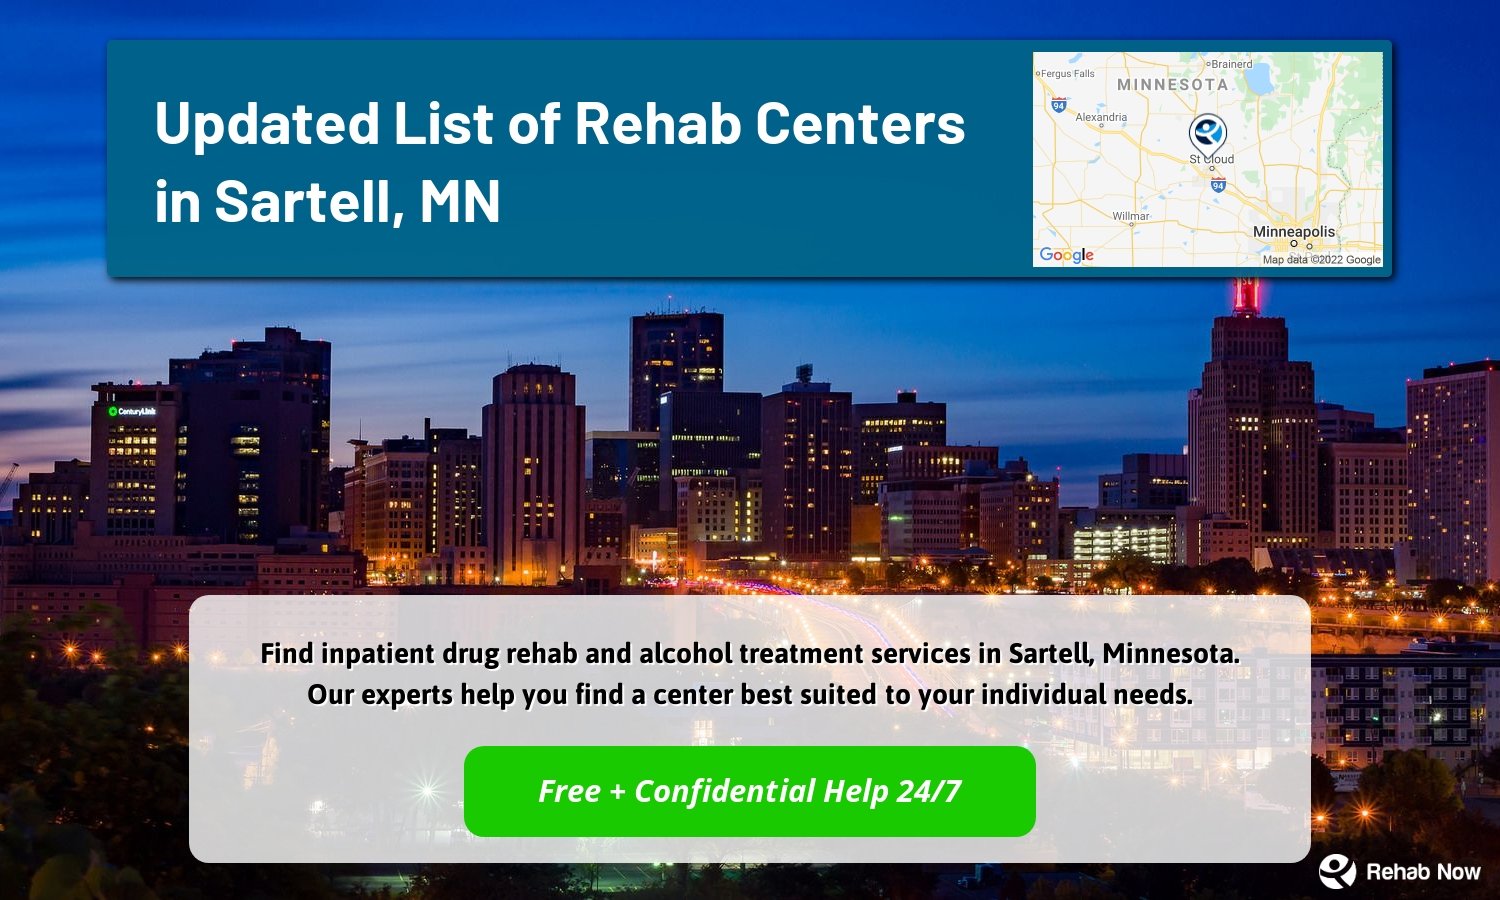 Find inpatient drug rehab and alcohol treatment services in Sartell, Minnesota. Our experts help you find a center best suited to your individual needs.